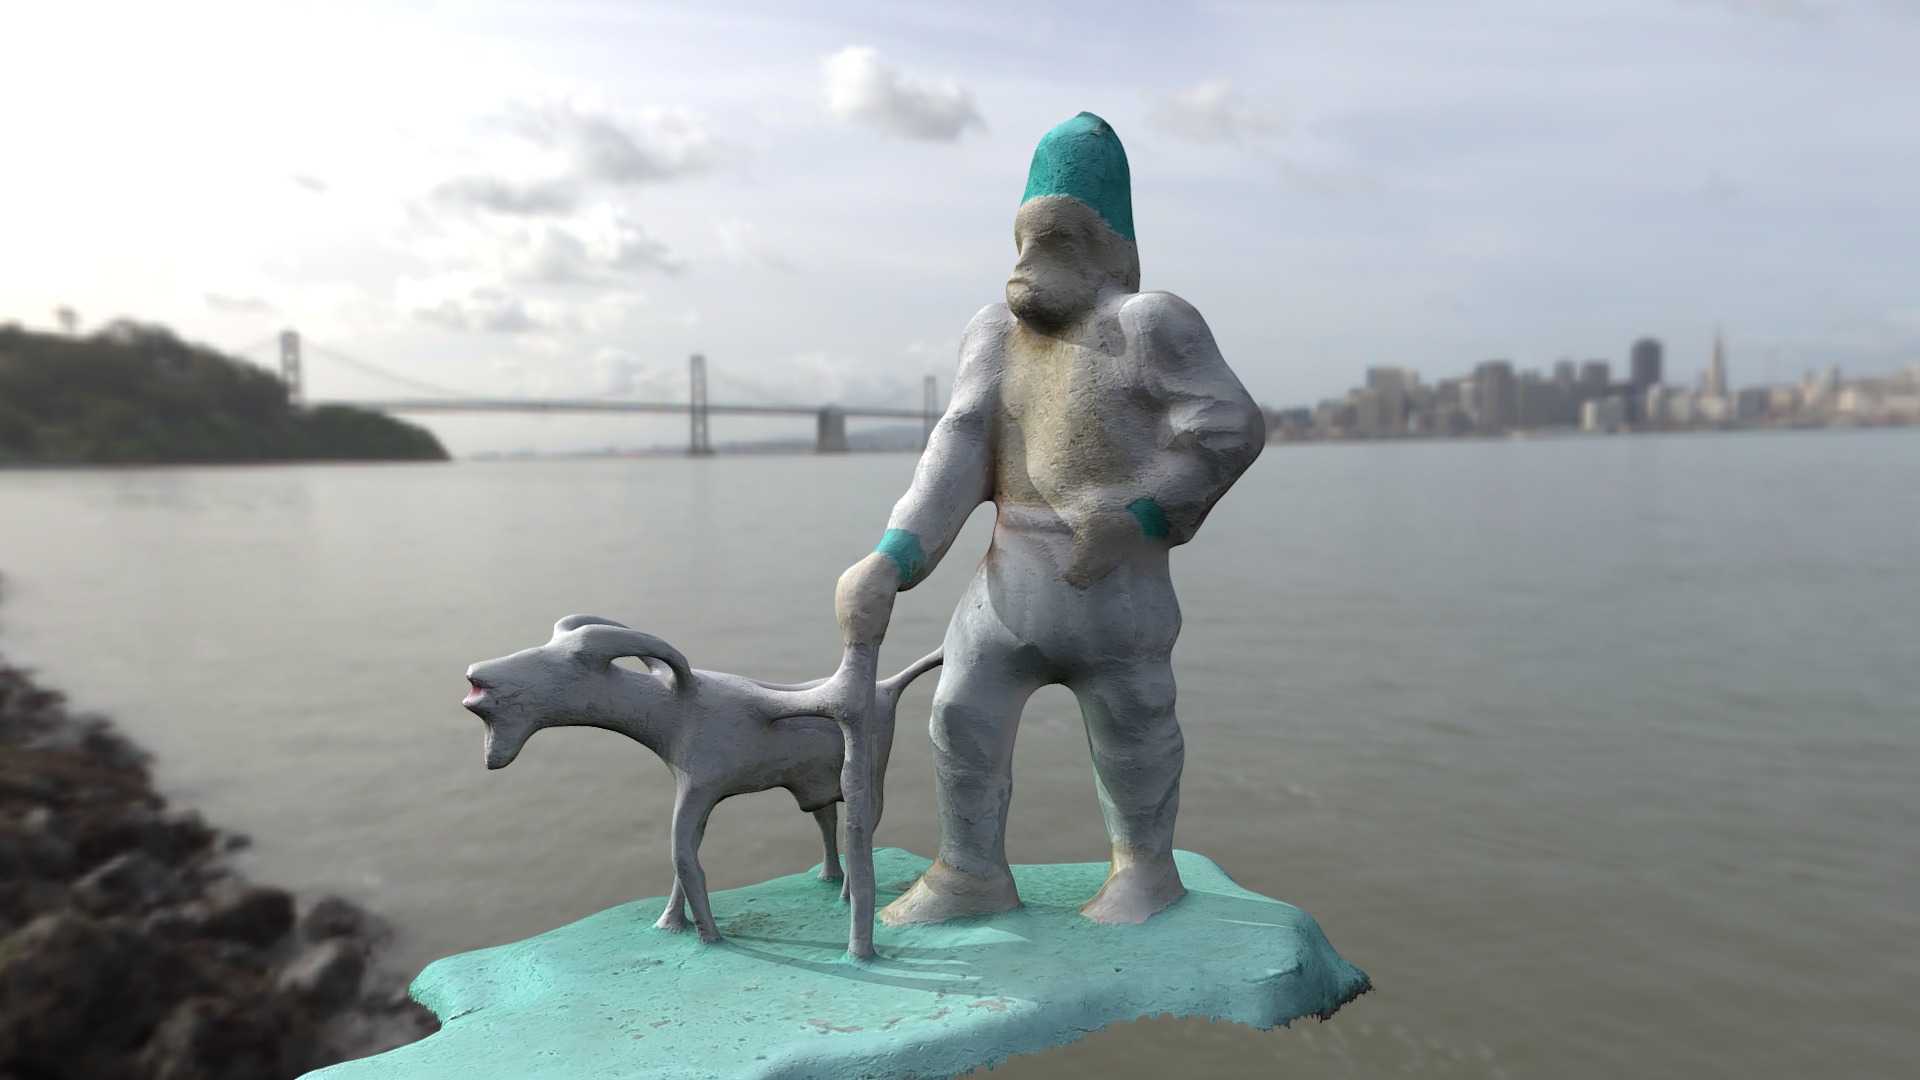 3D model Sculpture of Shepherd - This is a 3D model of the Sculpture of Shepherd. The 3D model is about a toy figurine of a cat and a dog on a blue platform by water.